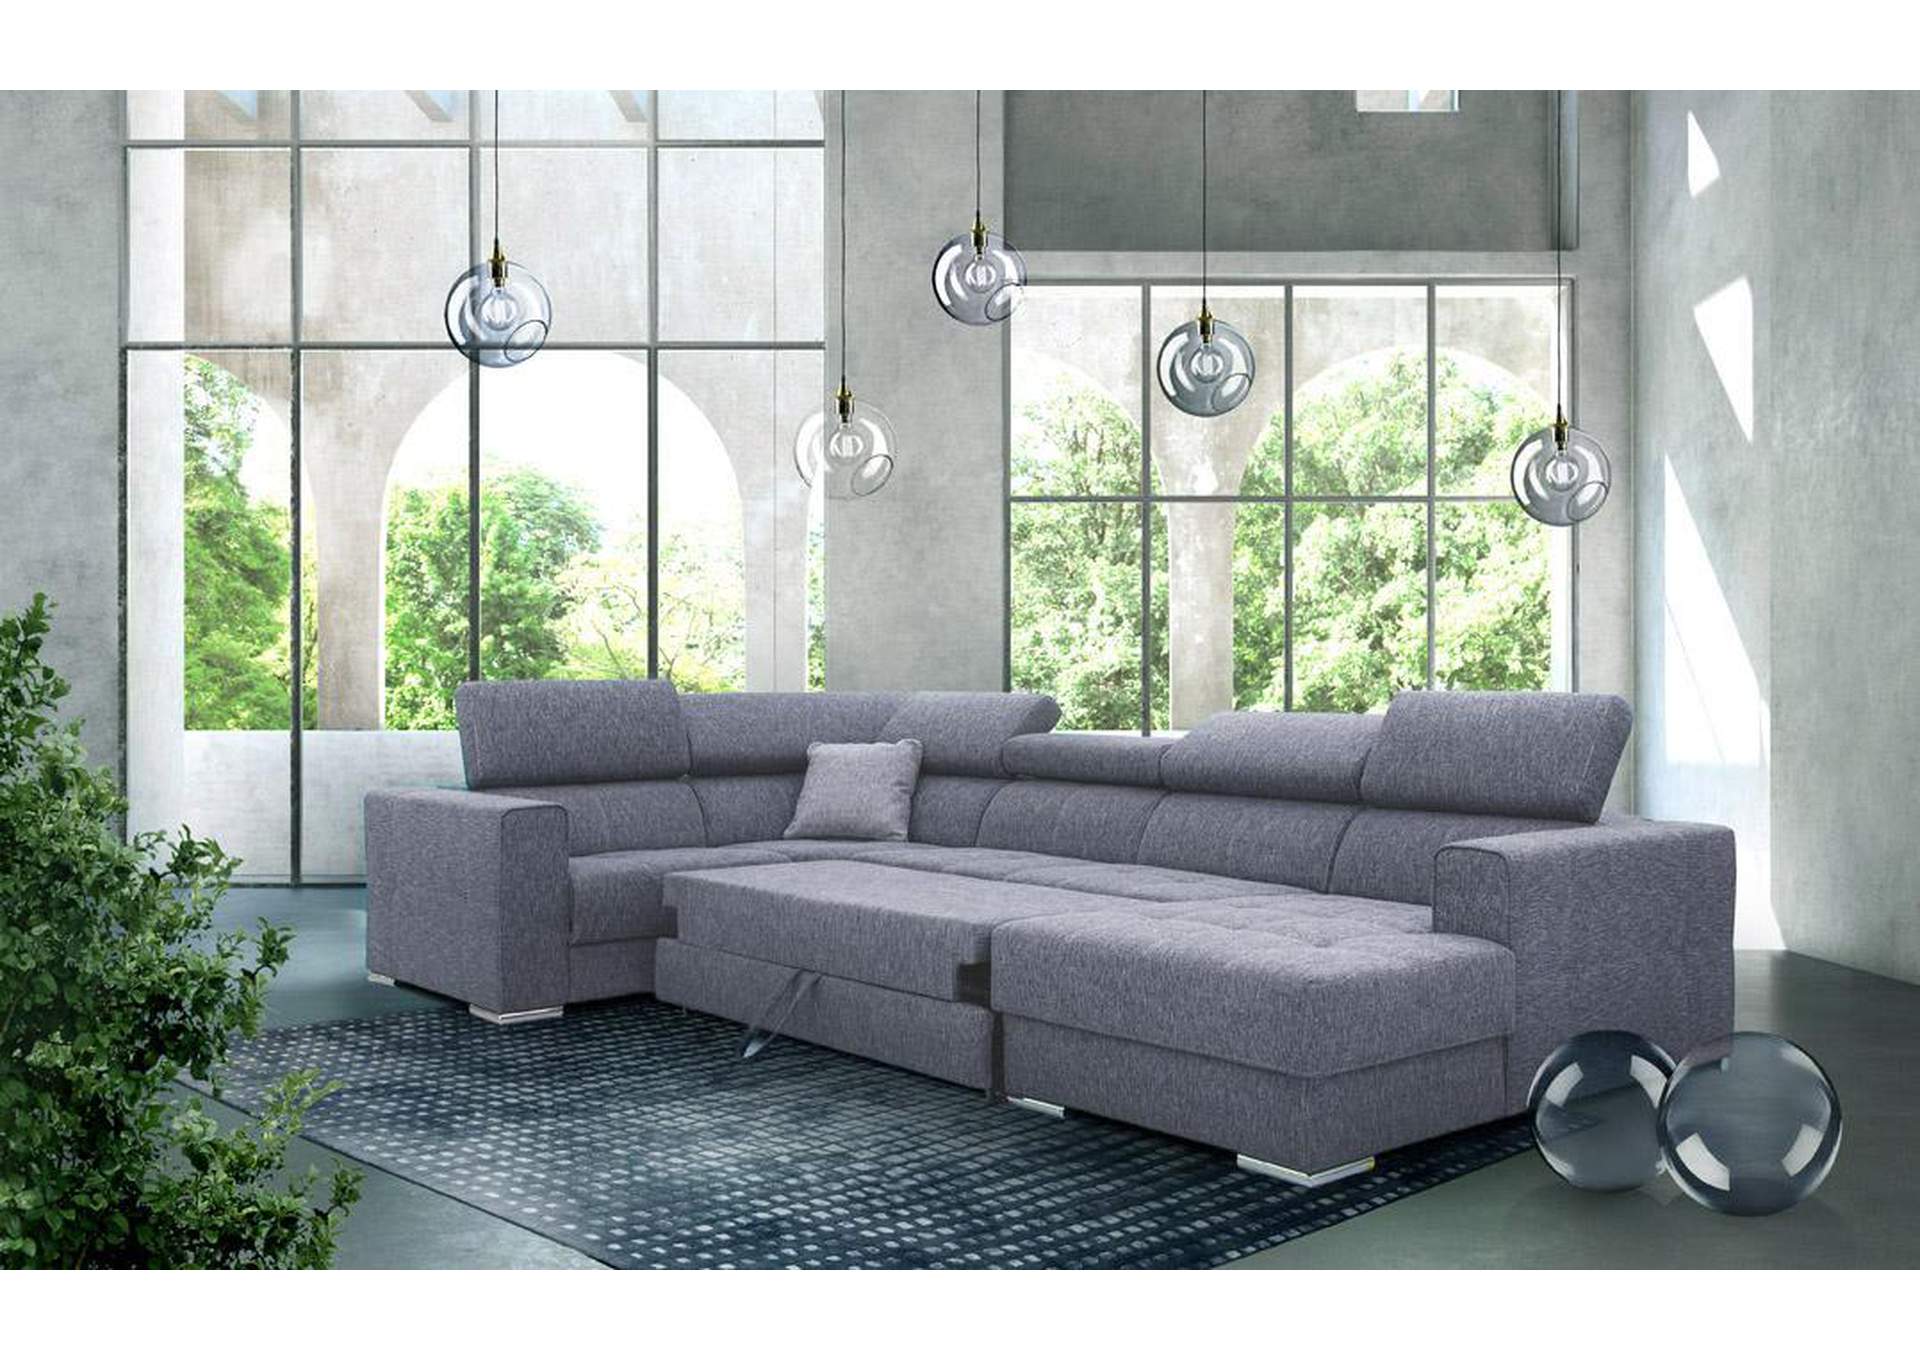 Quartz Sectional Right with Electric Recliner and Bed SET,ESF Wholesale Furniture